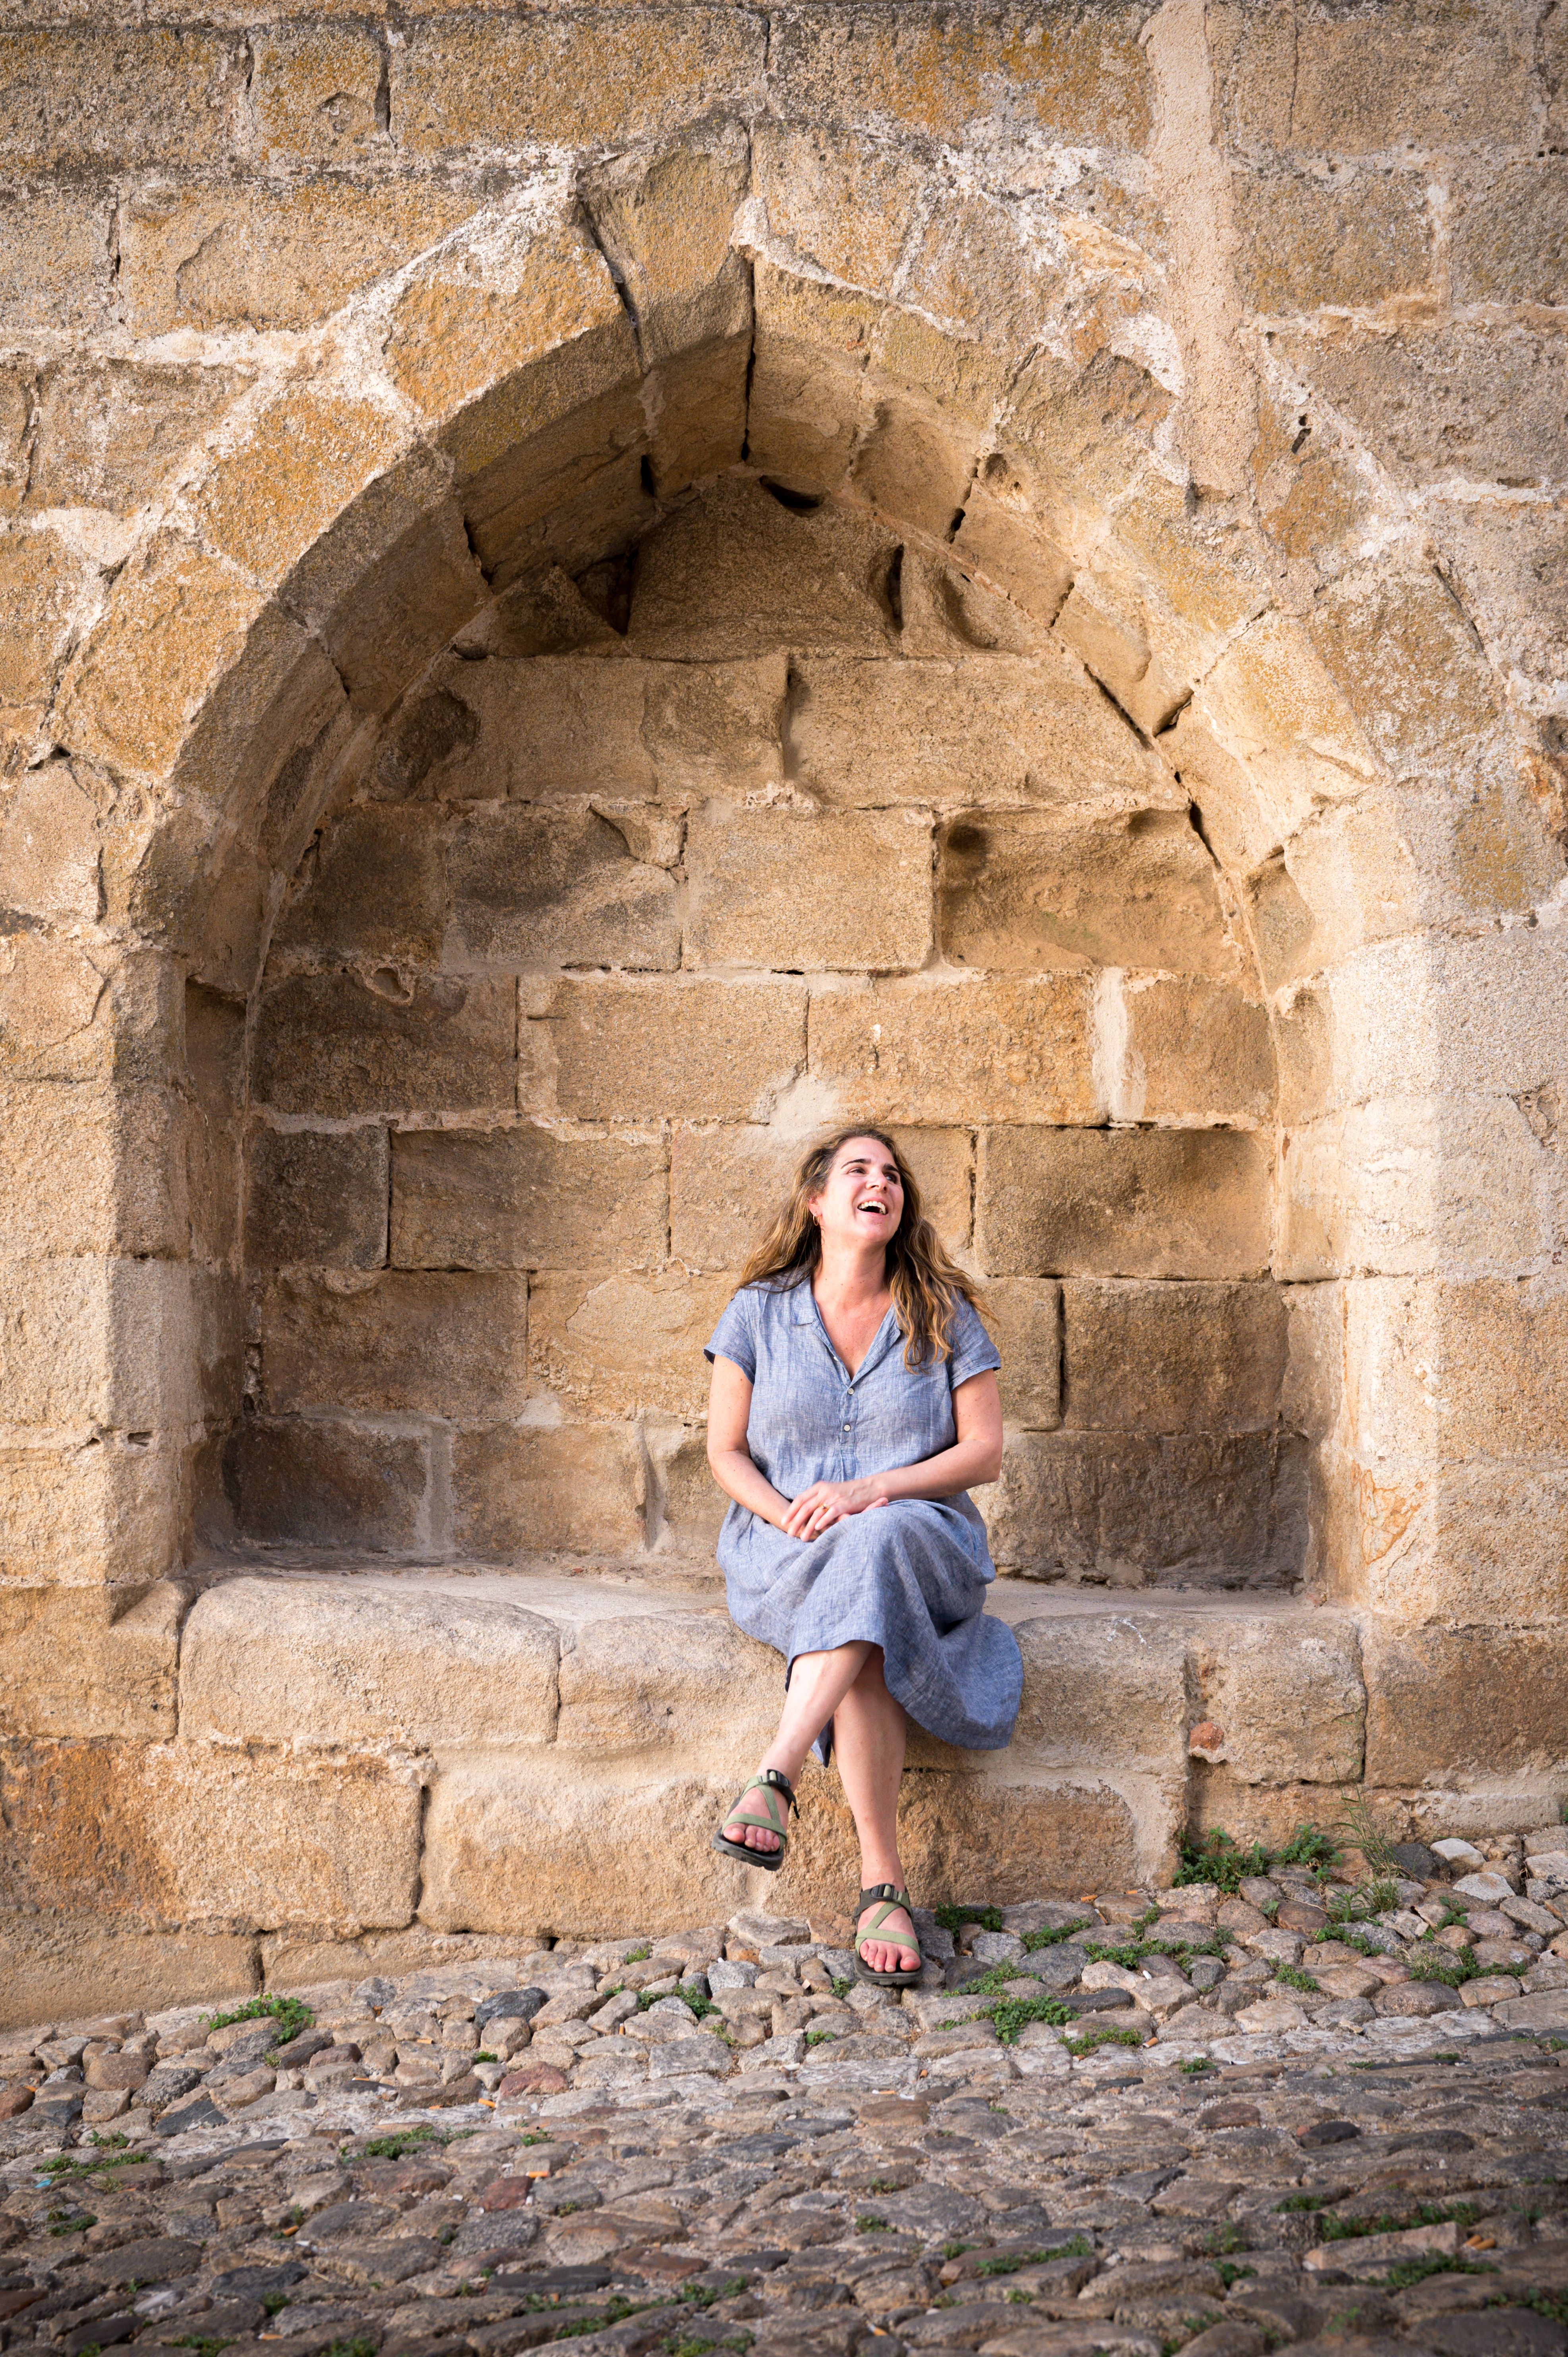 Smiling woman sits in old archway on cobblestone street in Portugal